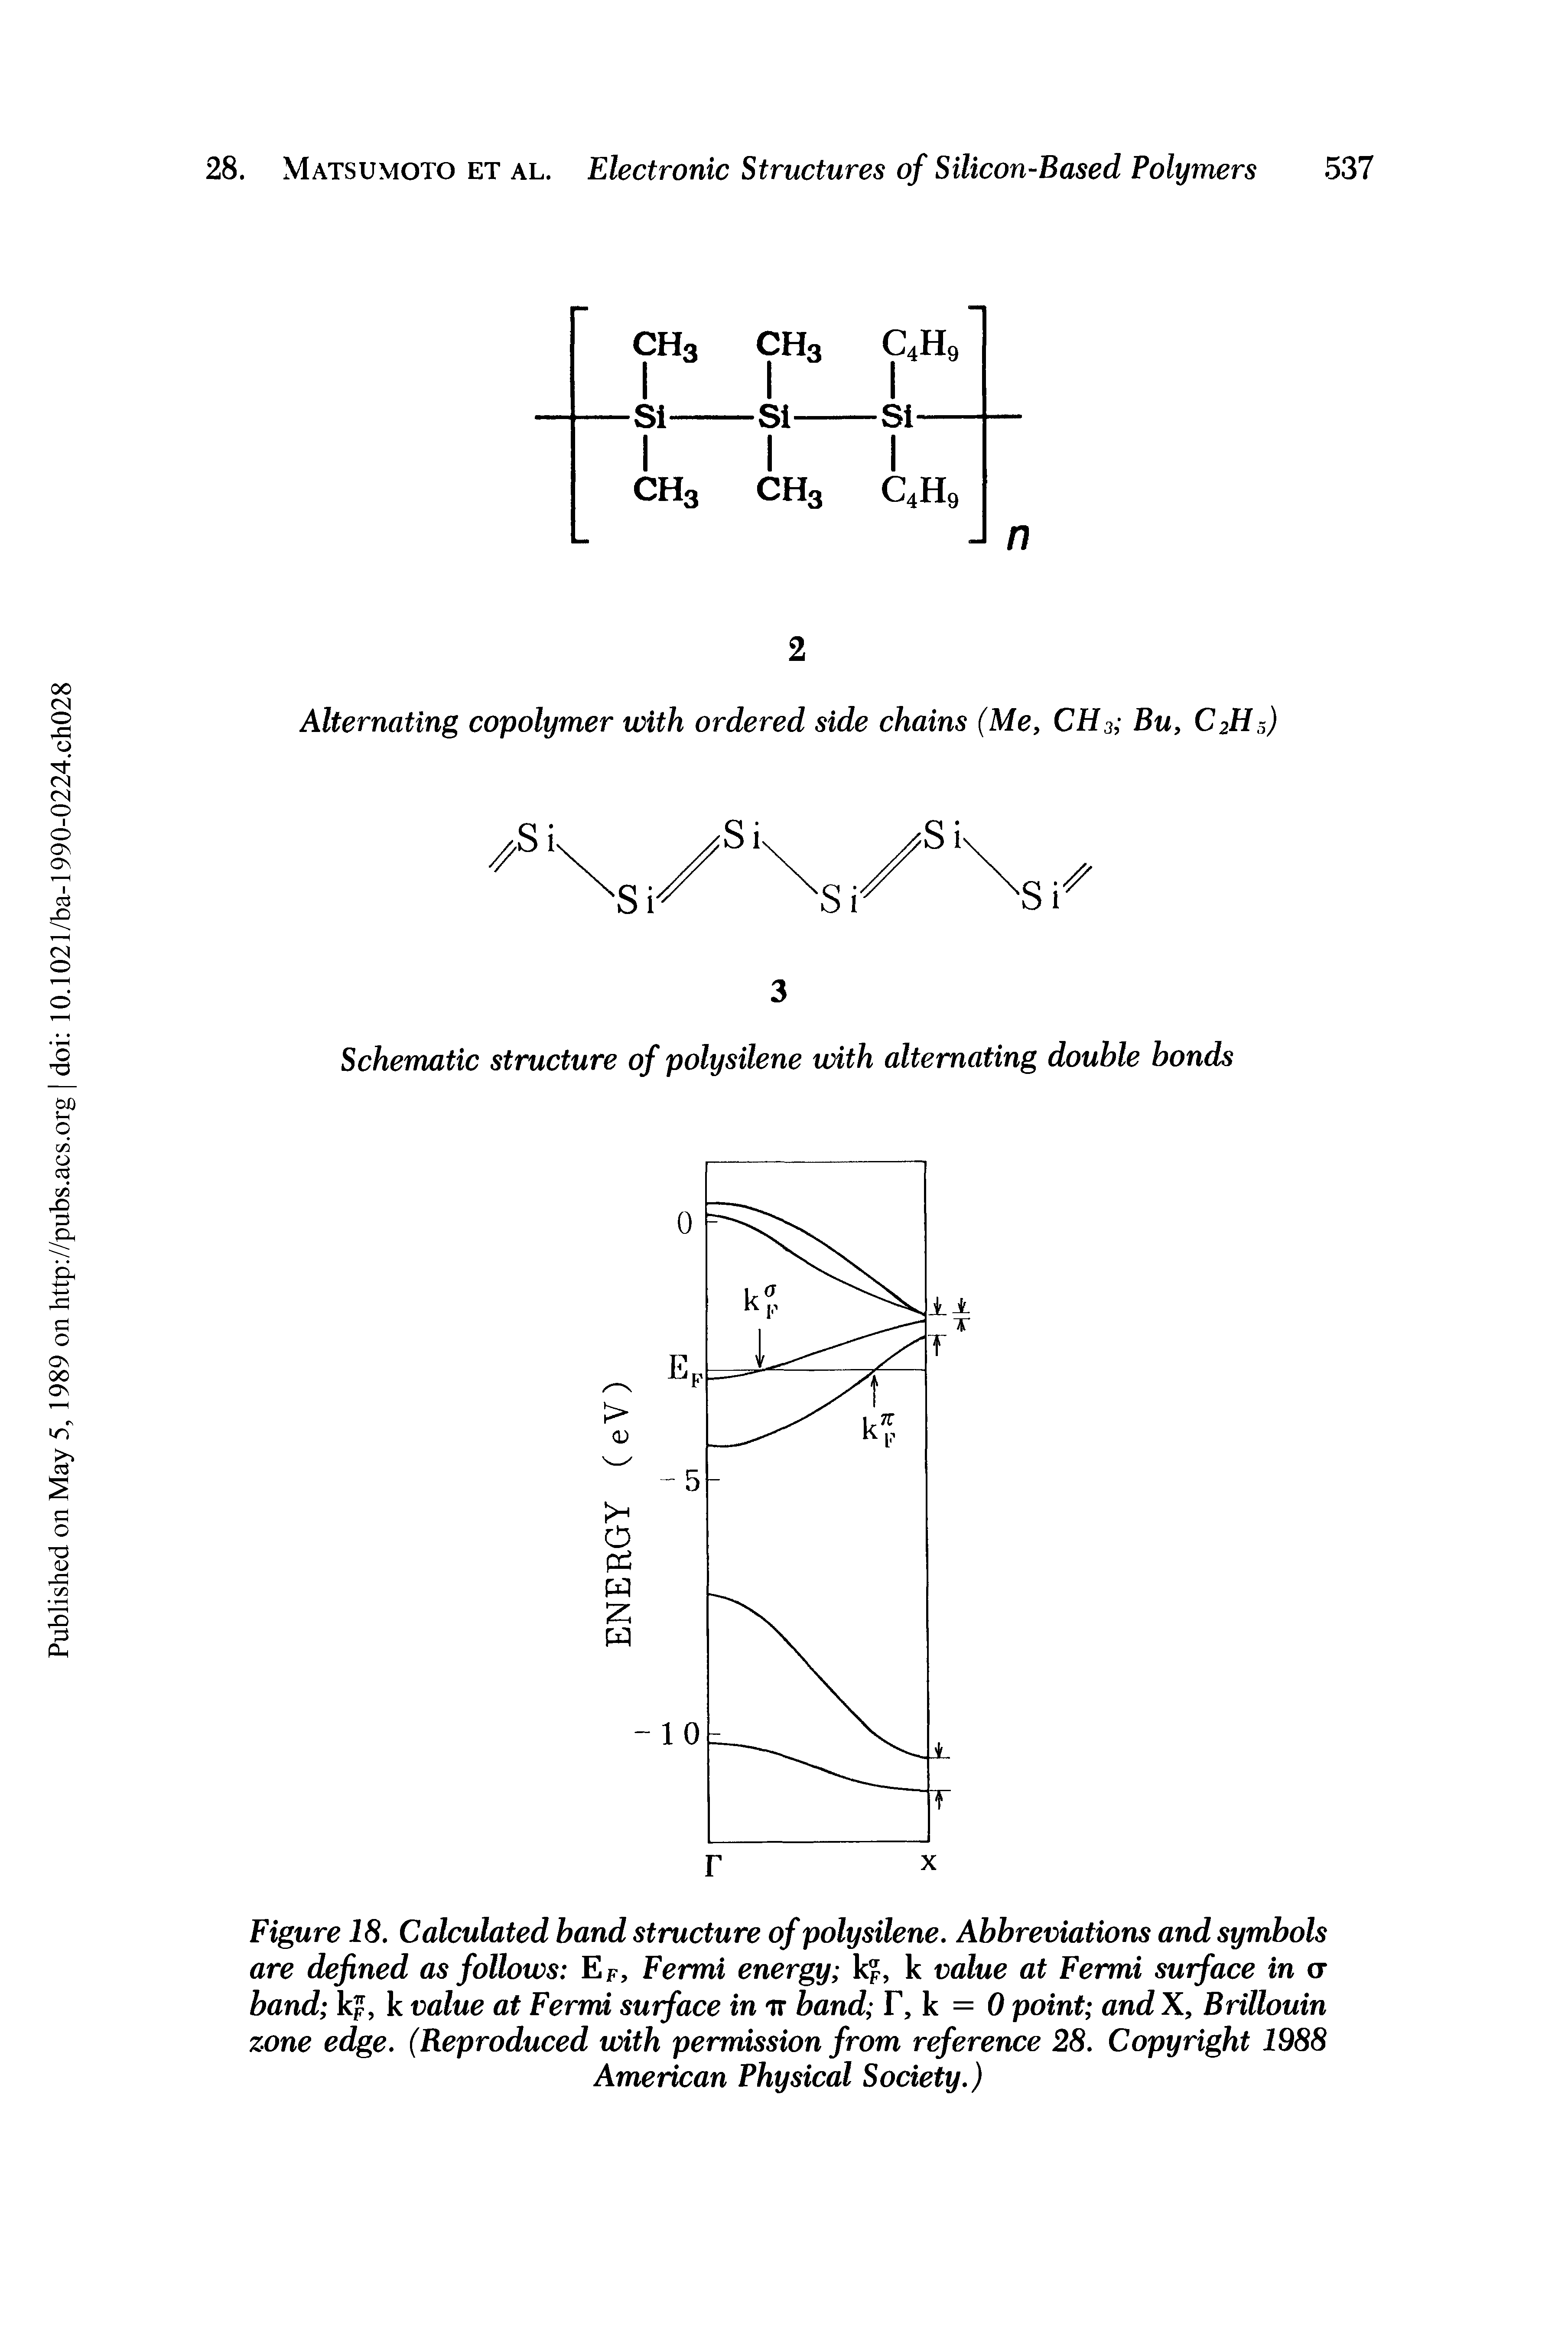 Schematic structure of polysilene with alternating double bonds...